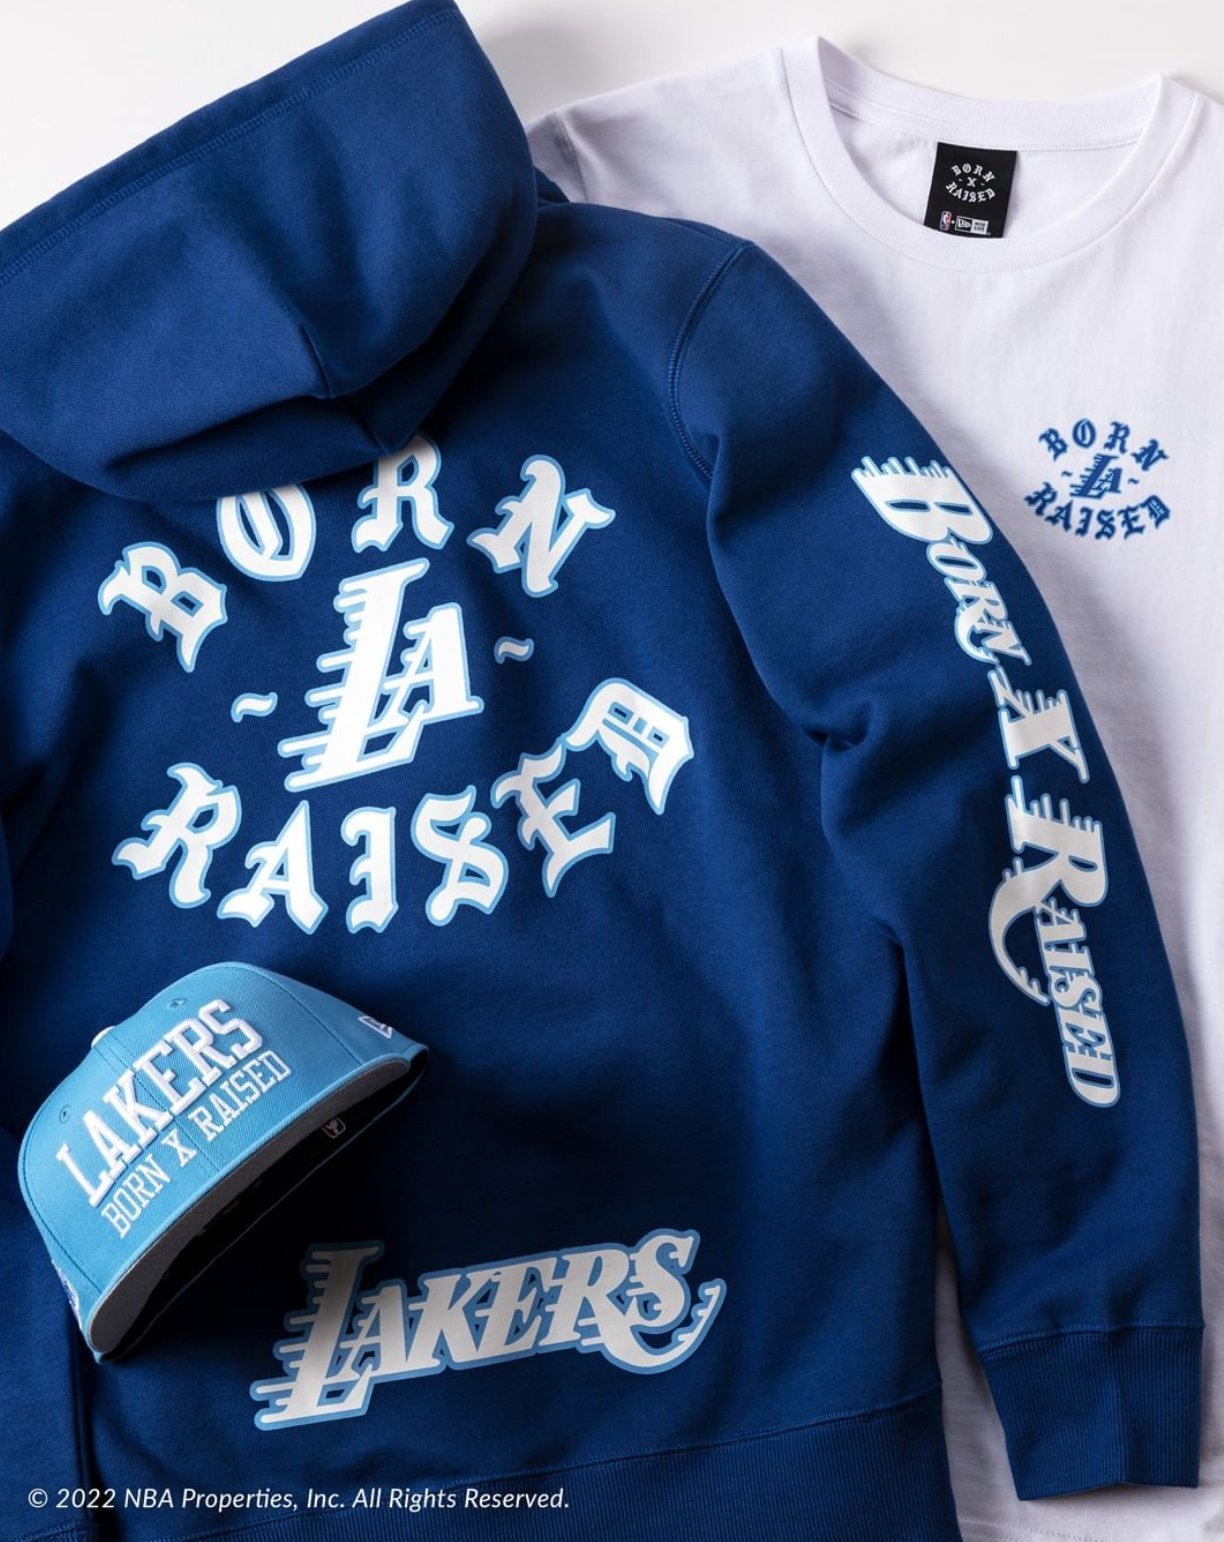 Born x Raised City of Champs Lakers Dodgers Release Info